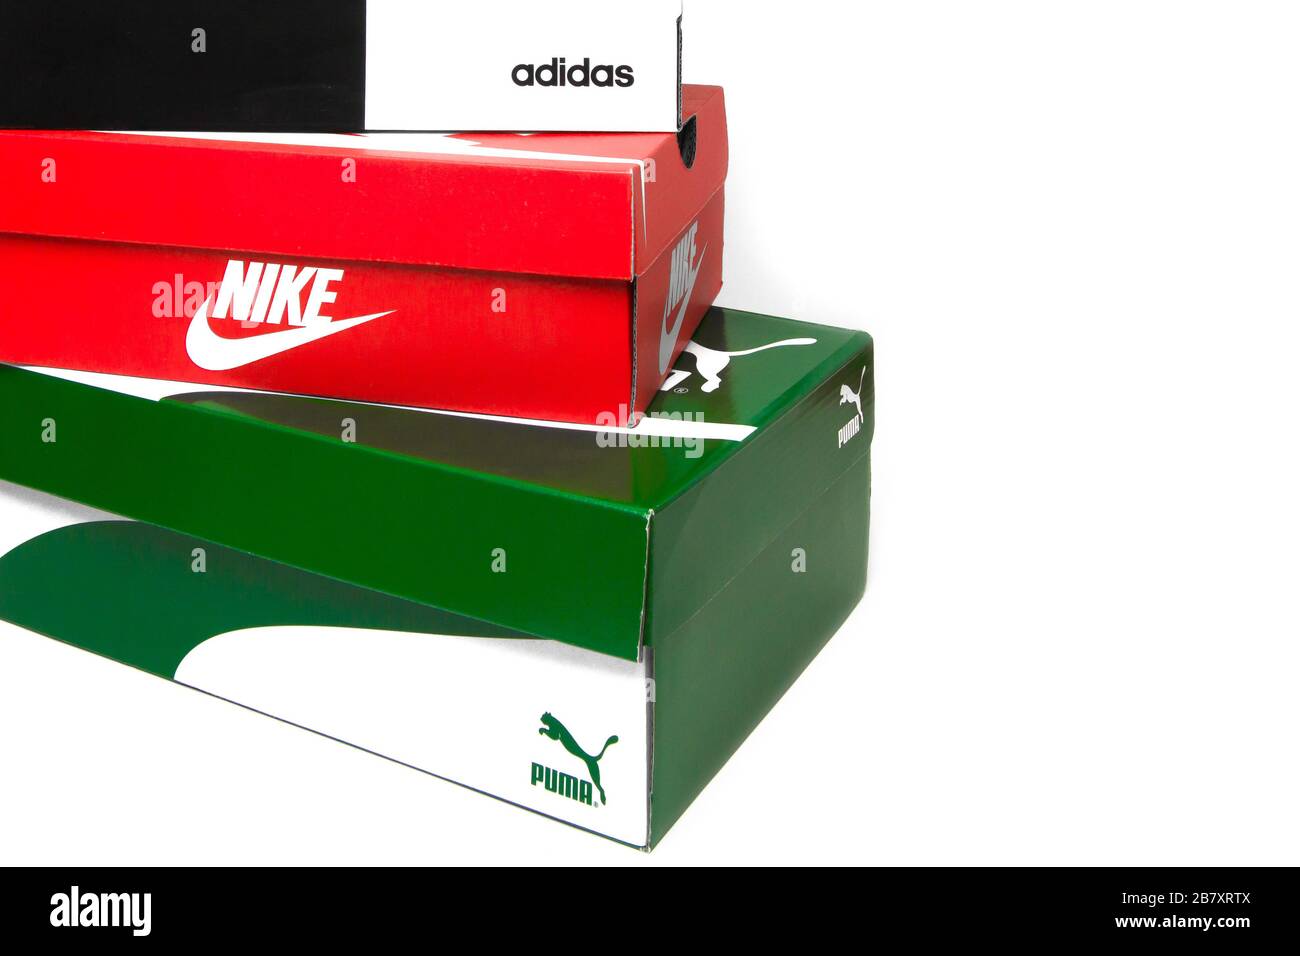 Puma, Adidas, Nile shoes boxes are isolated on a white background. Concept  of shoe shop advertising. San Francisco, USA, March 2020 Stock Photo - Alamy